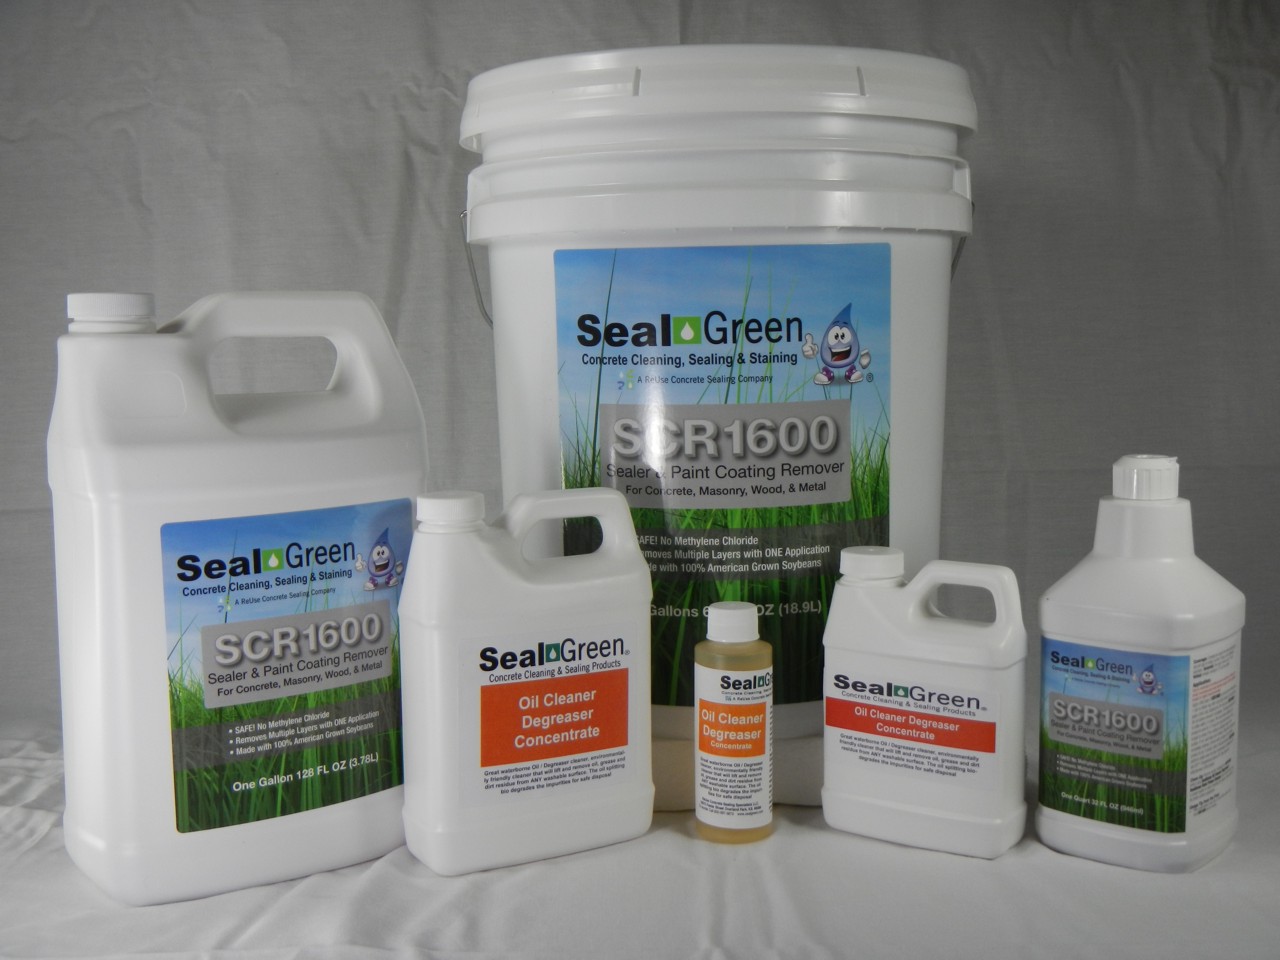 What is the difference between Xylene and SealGreen SCR 1600 Coating Remover